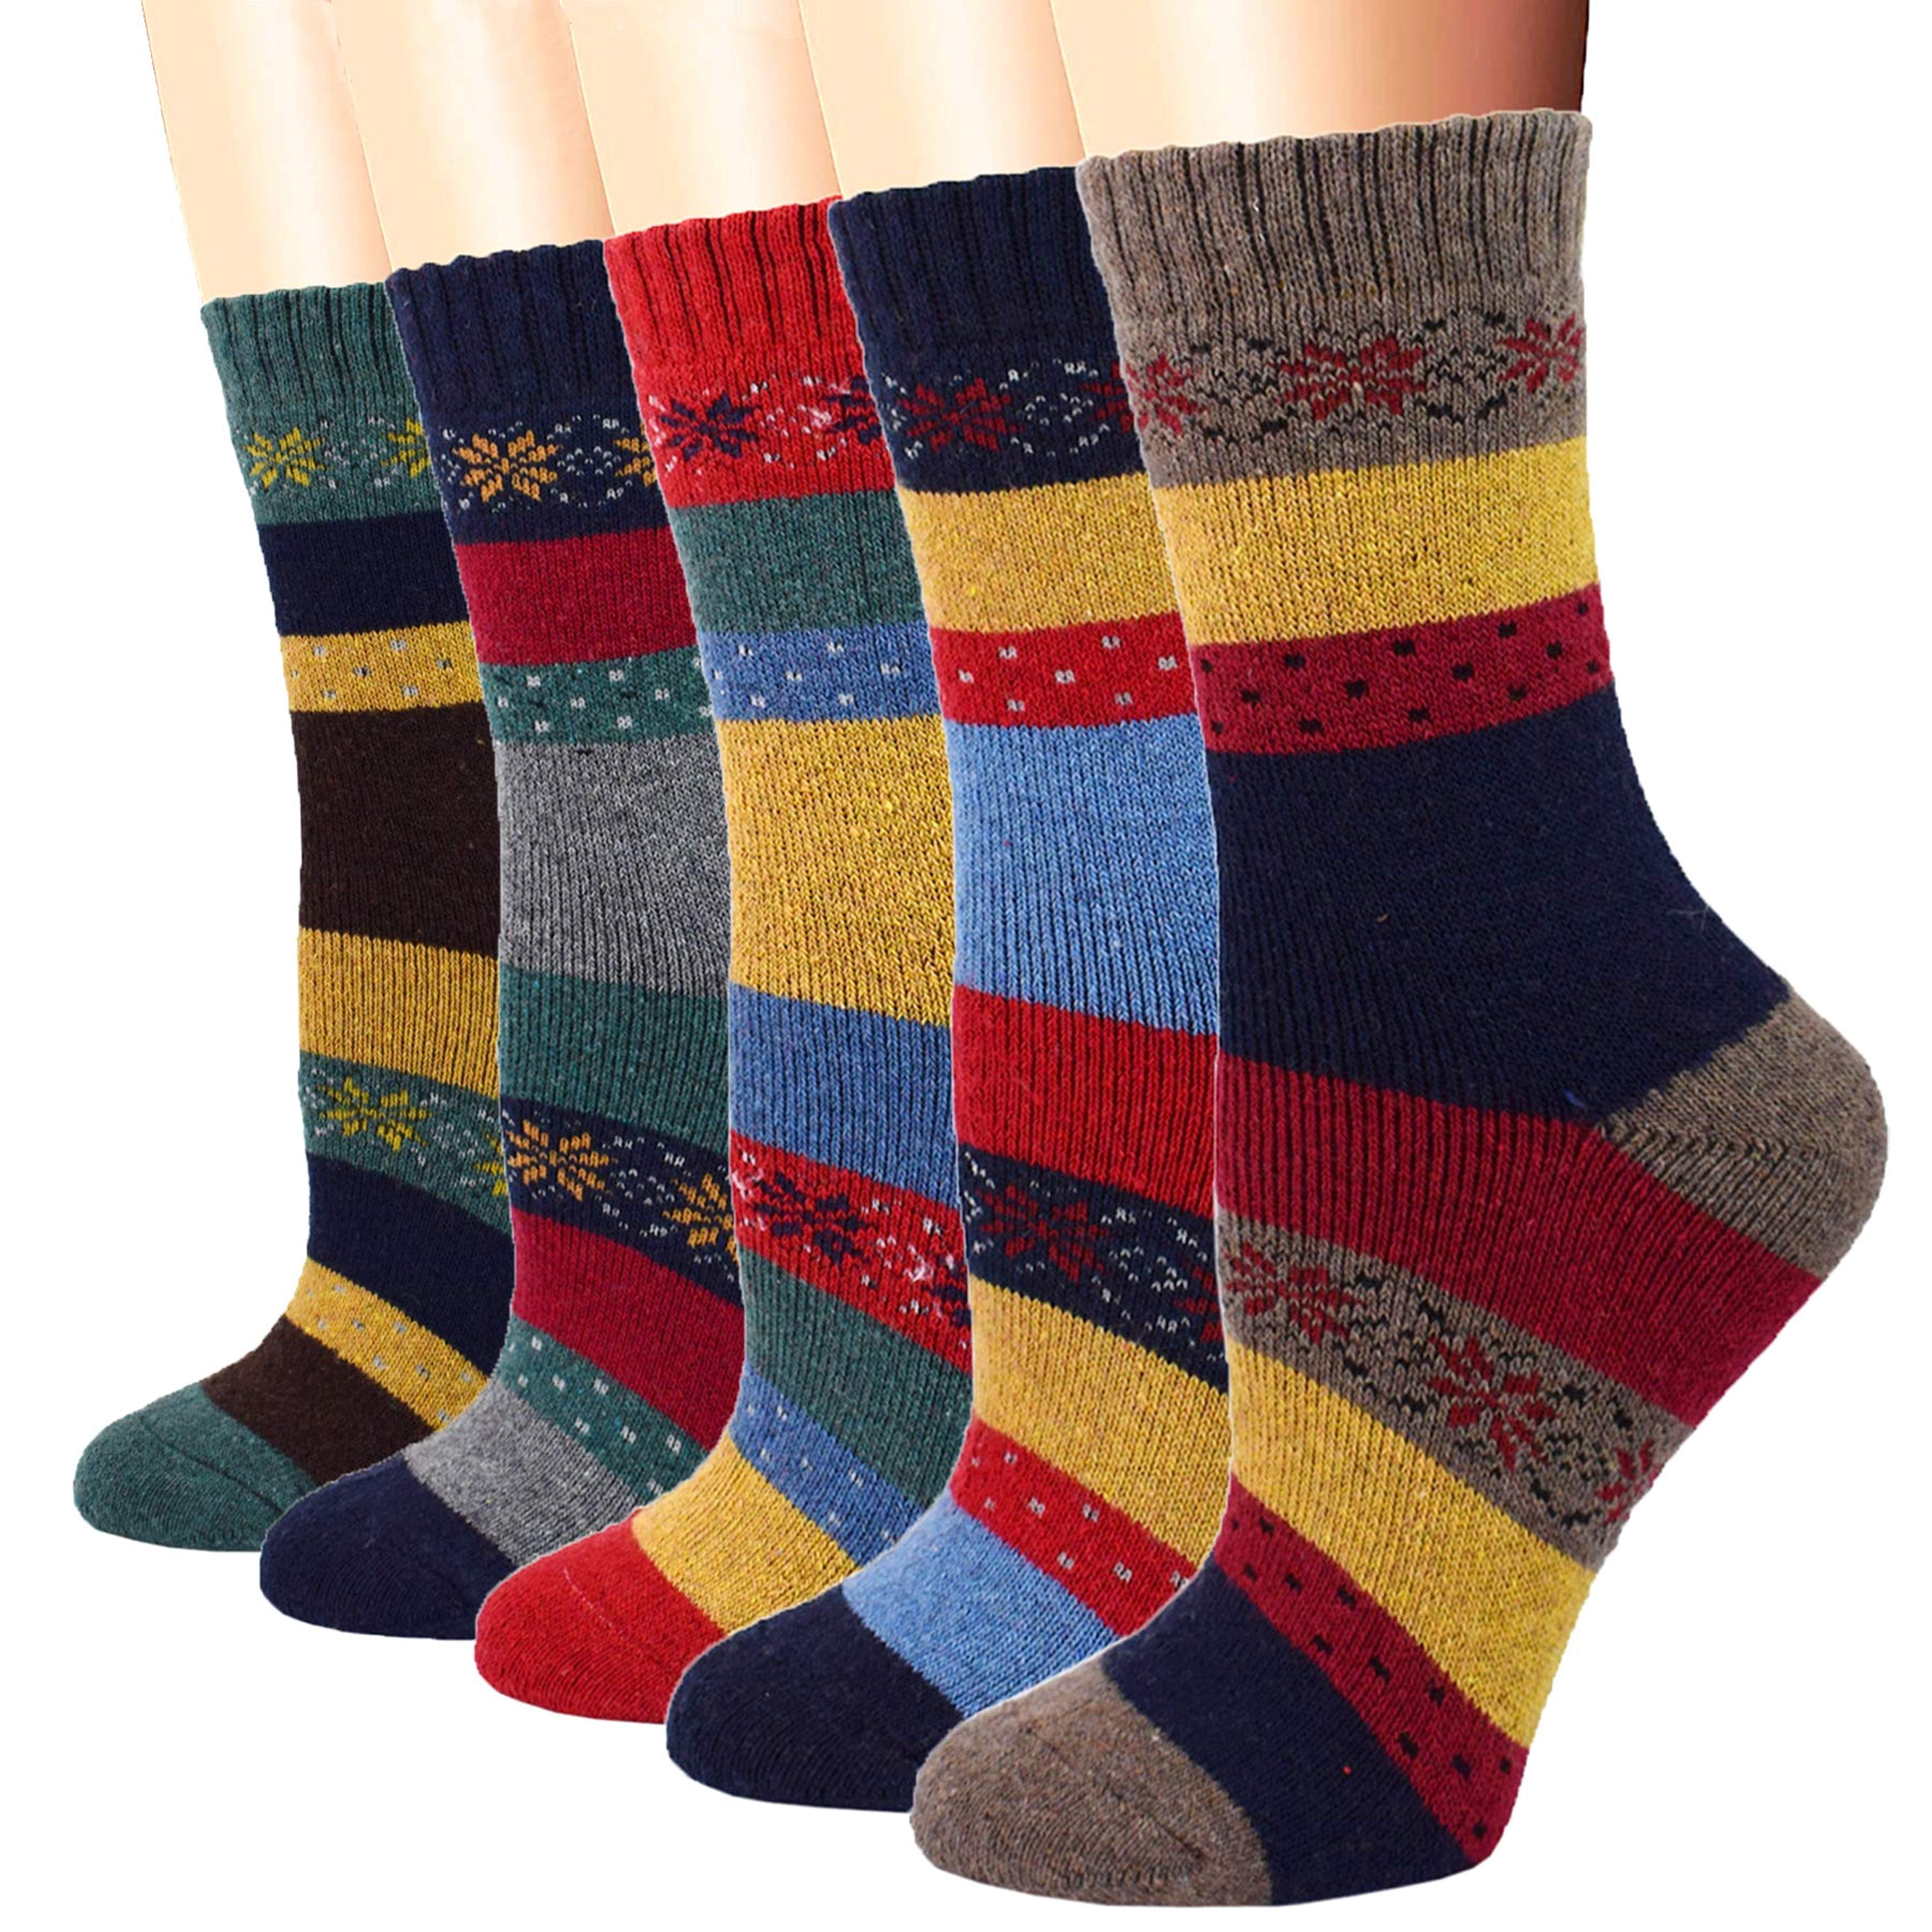 KODH New Mens Cotton Tube Socks Autumn and Winter Thick Casual Sports Striped Long Socks 10 Pairs Color : A